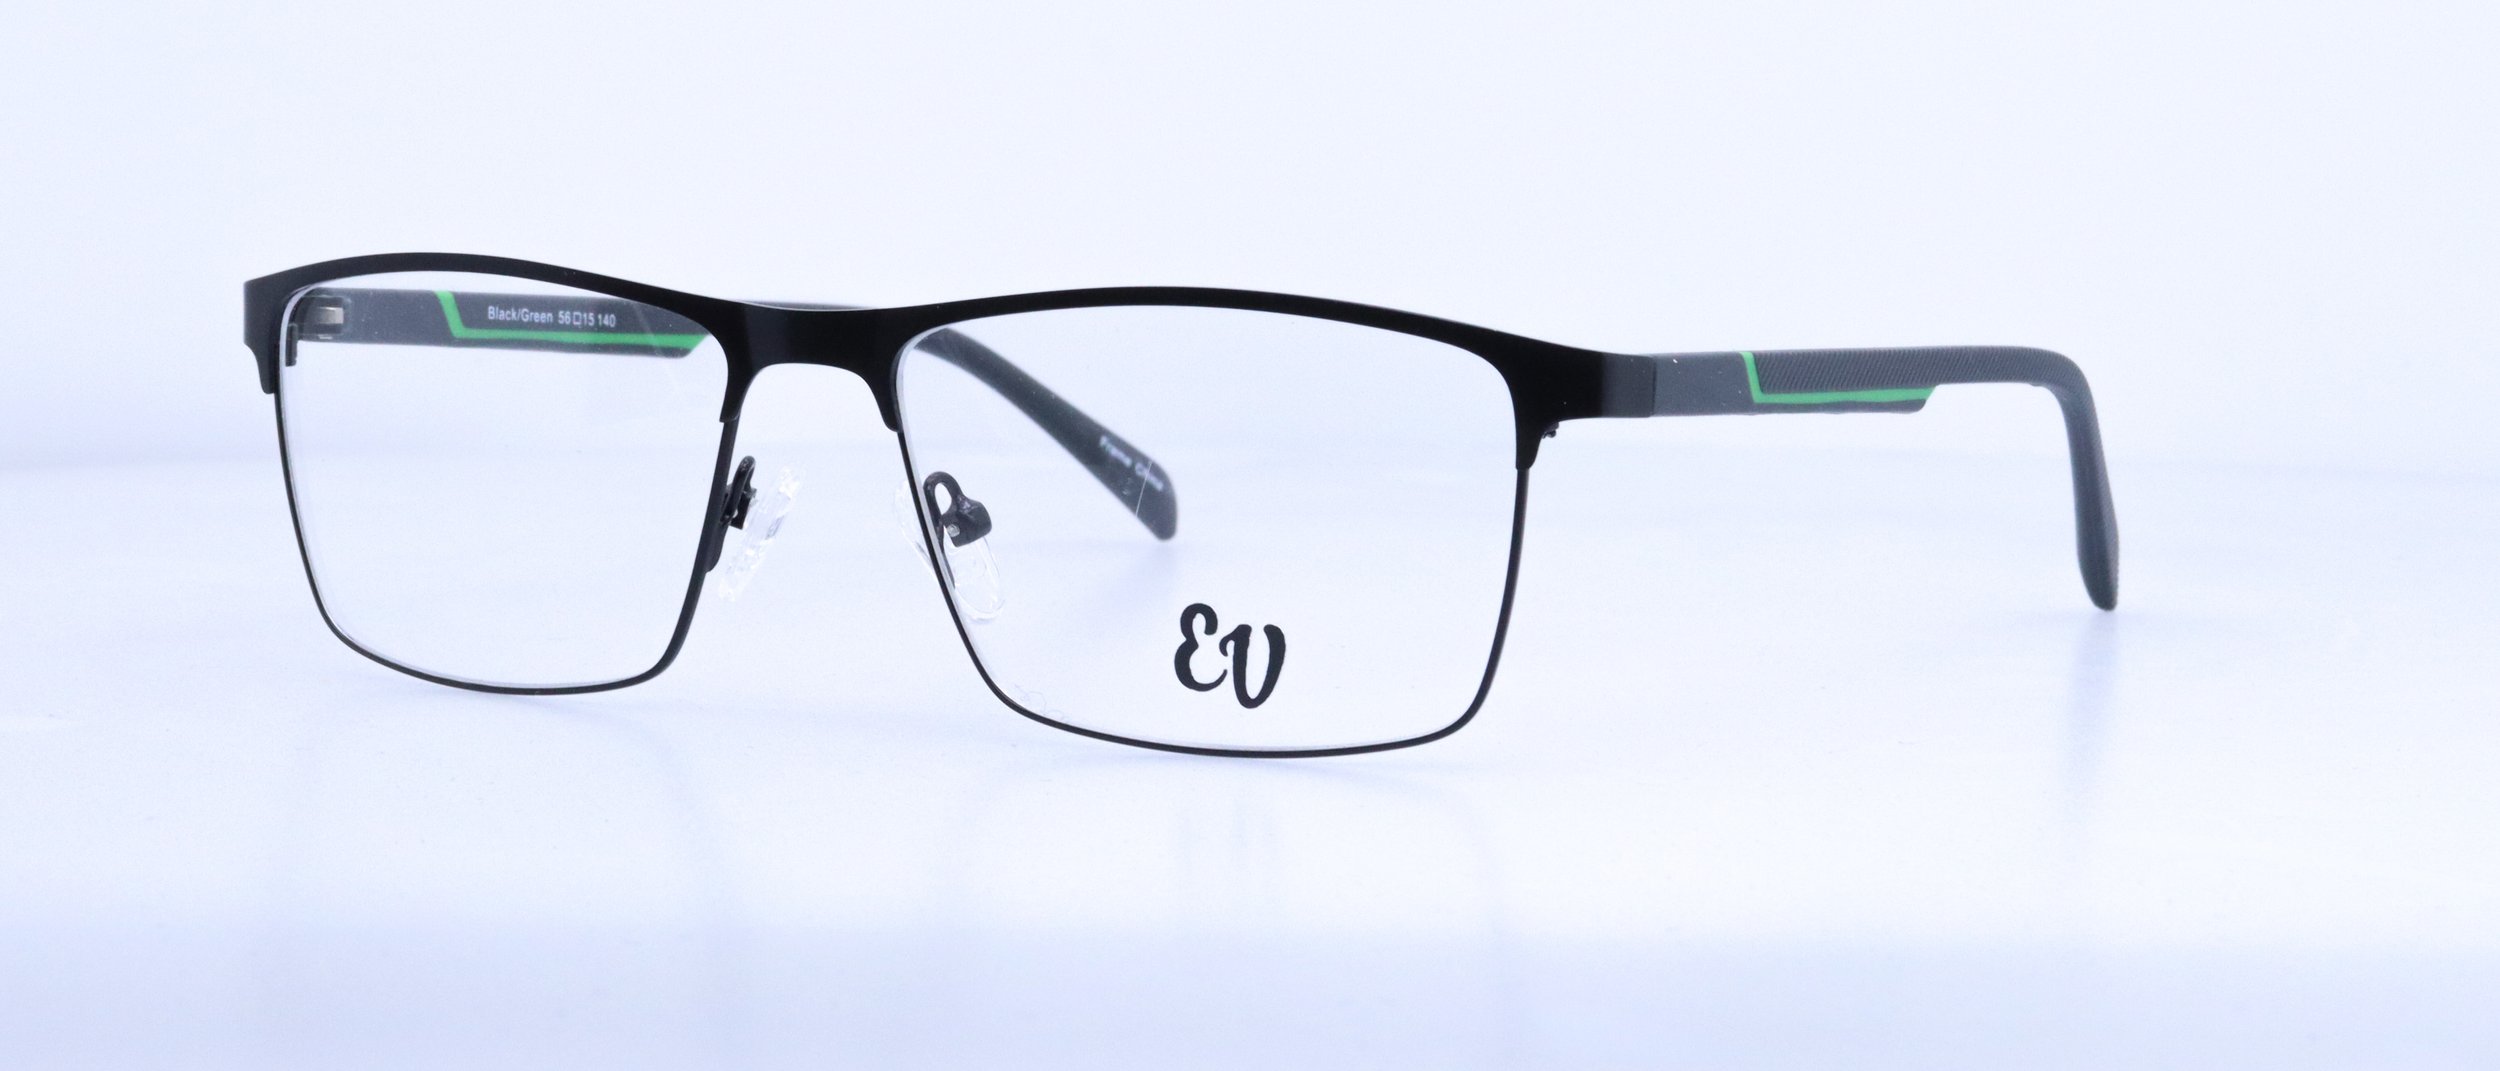  NEW!!! EV406: 56-15-140, Available in Black/Green or Gunmetal/Blue 